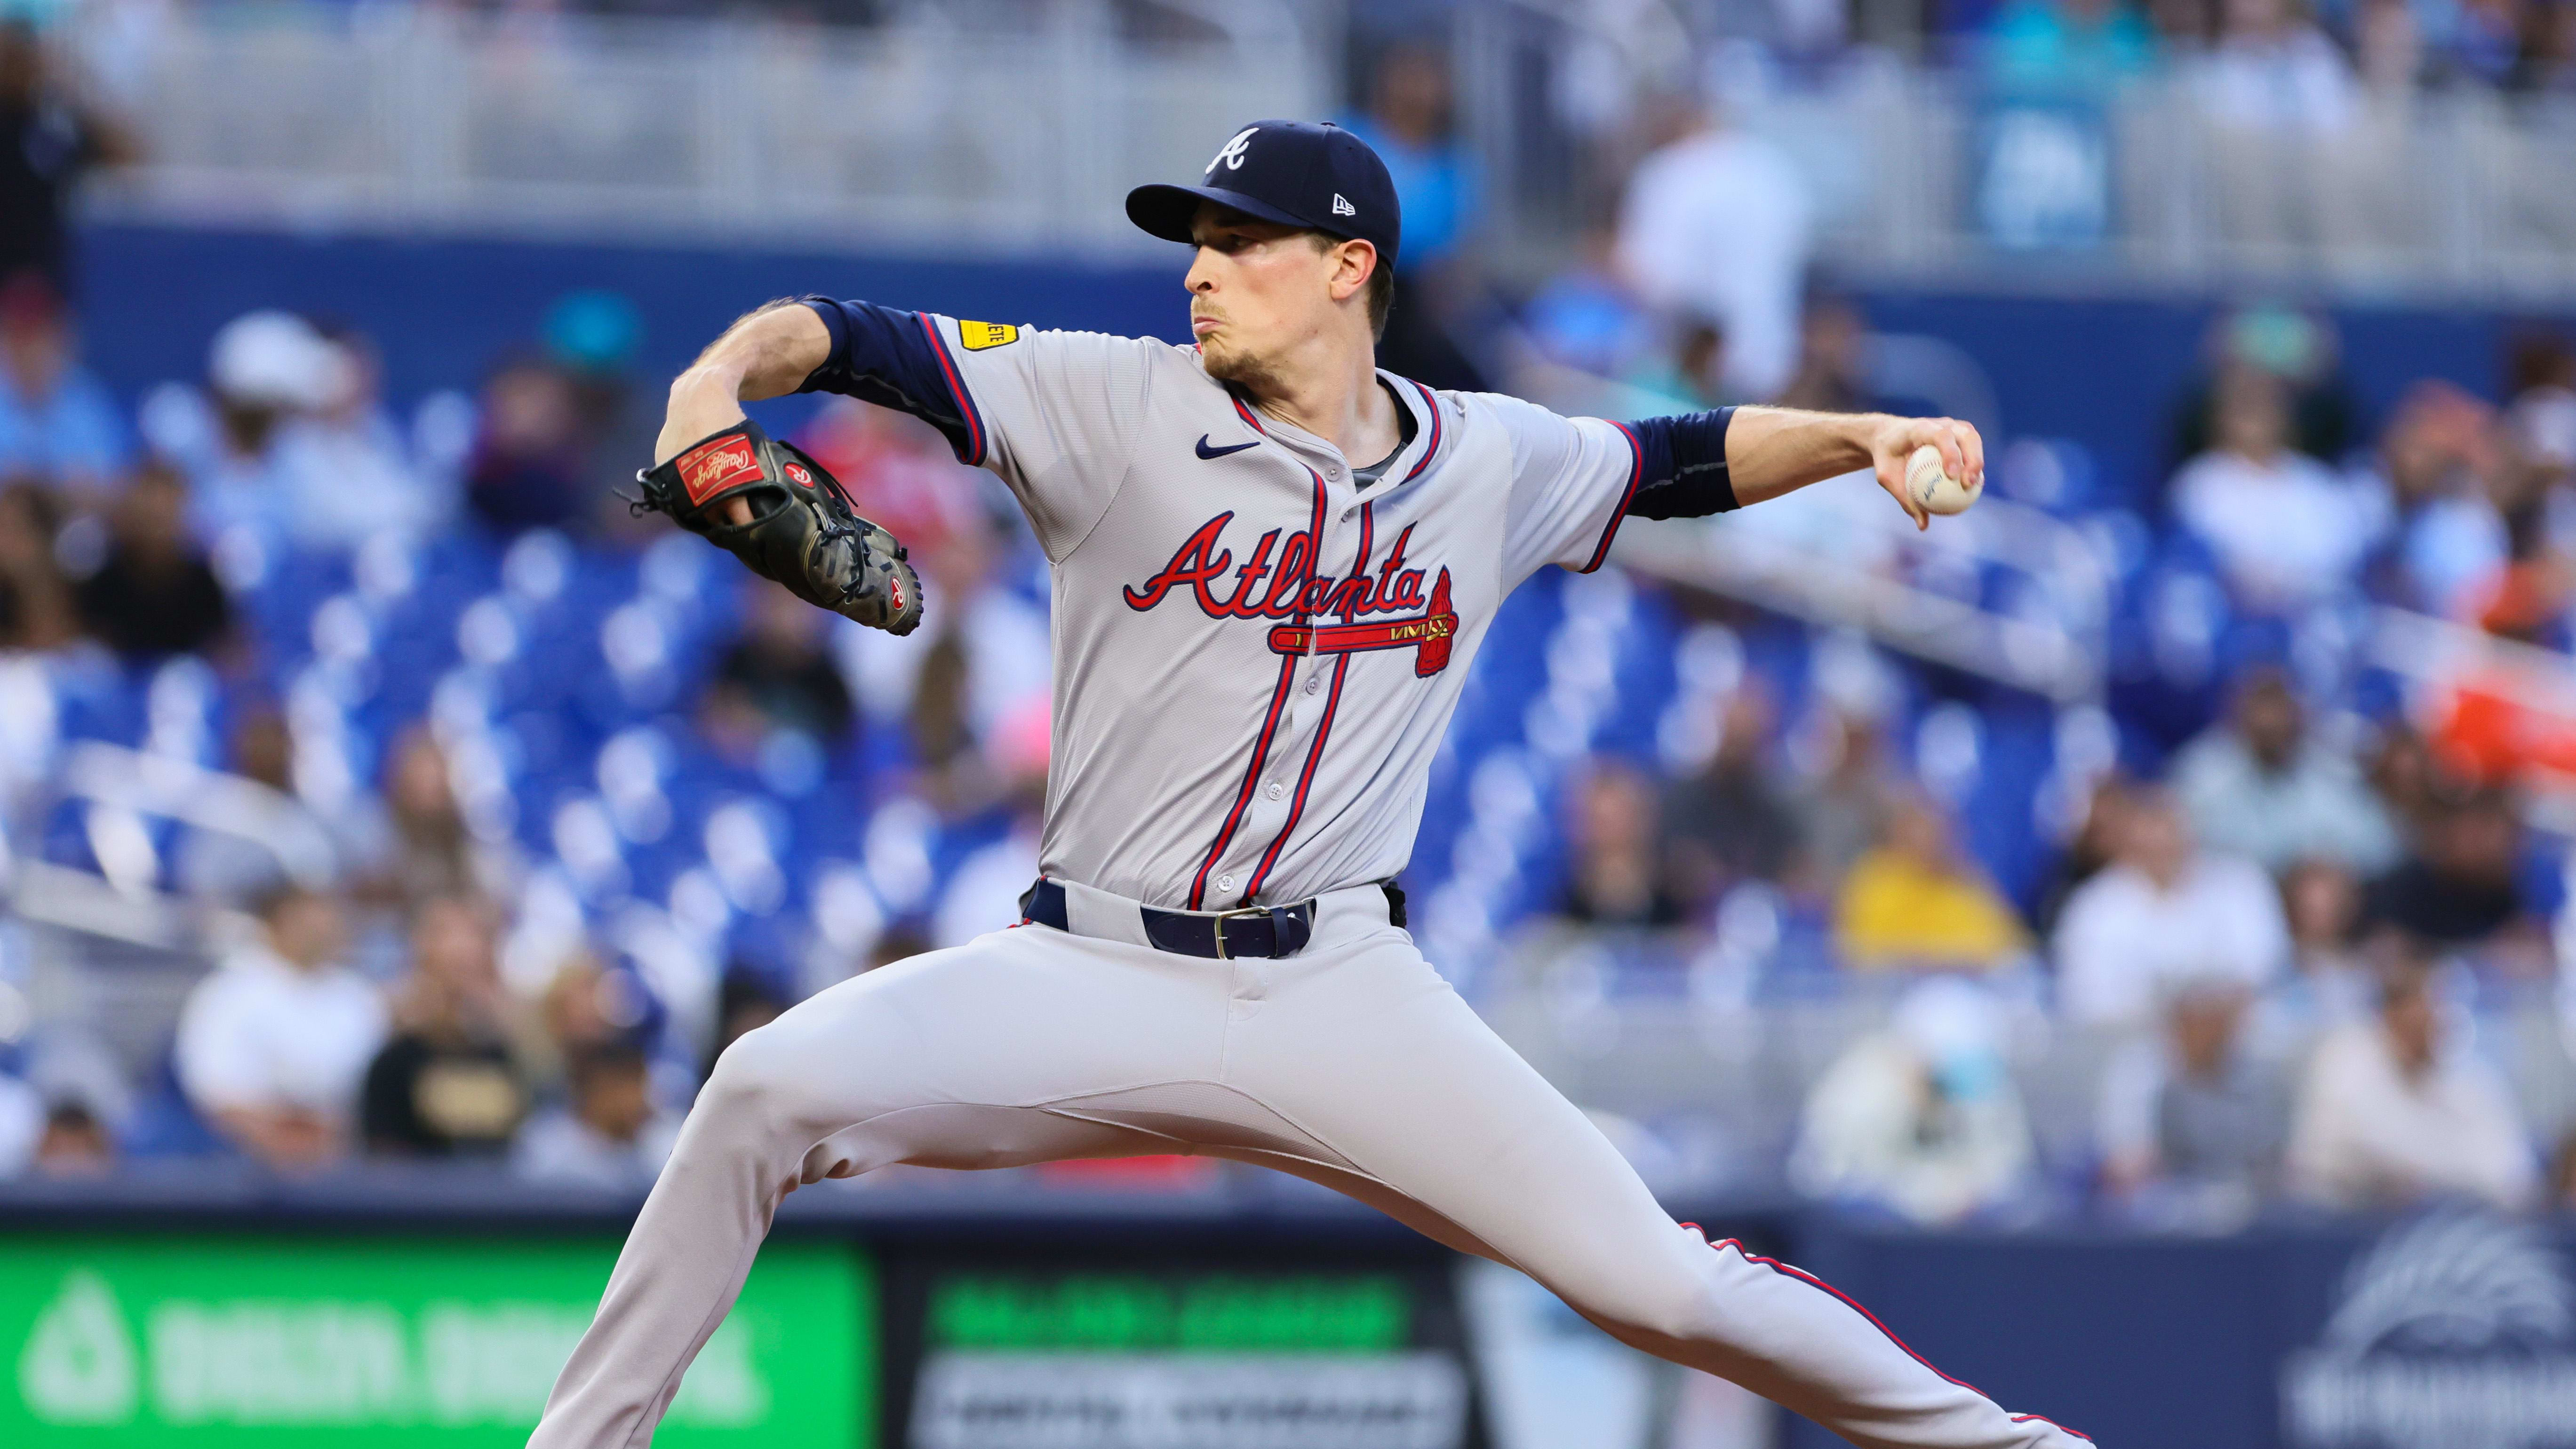 Atlanta Braves starting pitcher Max Fried looked like his old self against the Miami Marlins tonight, allowing only one run in 6.1 innings. 